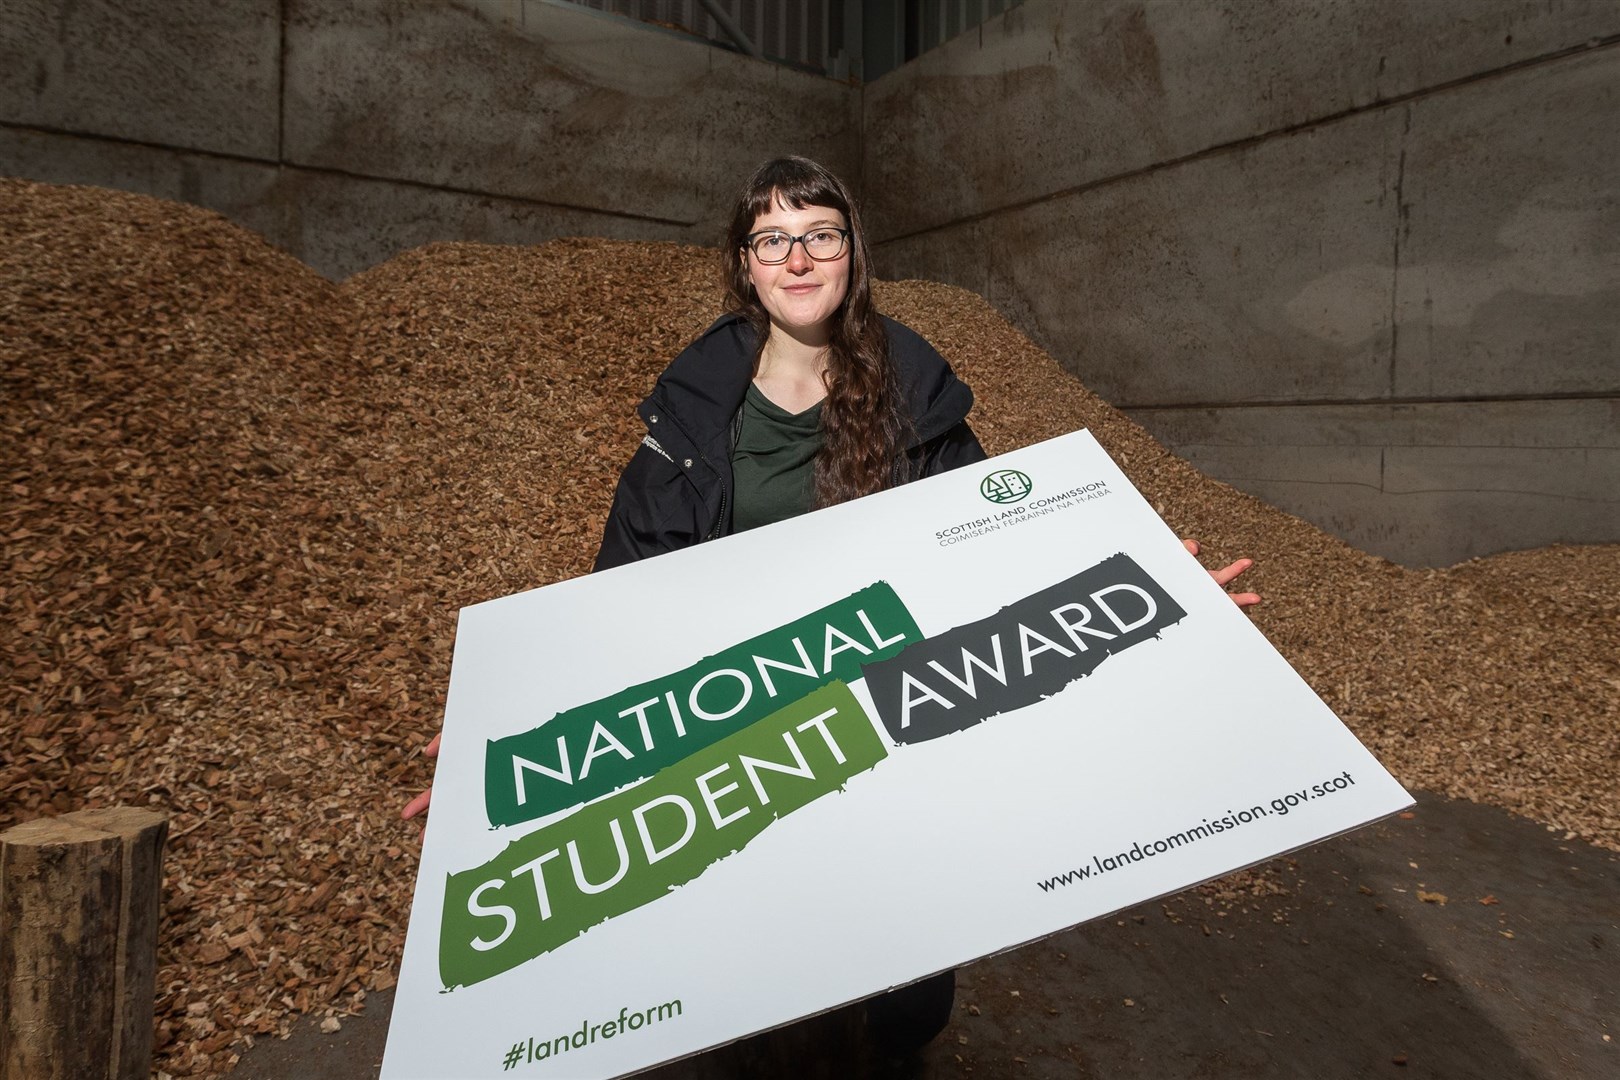 Heloise Le Moal received the Scottish Land Commission National Student Award 2020.